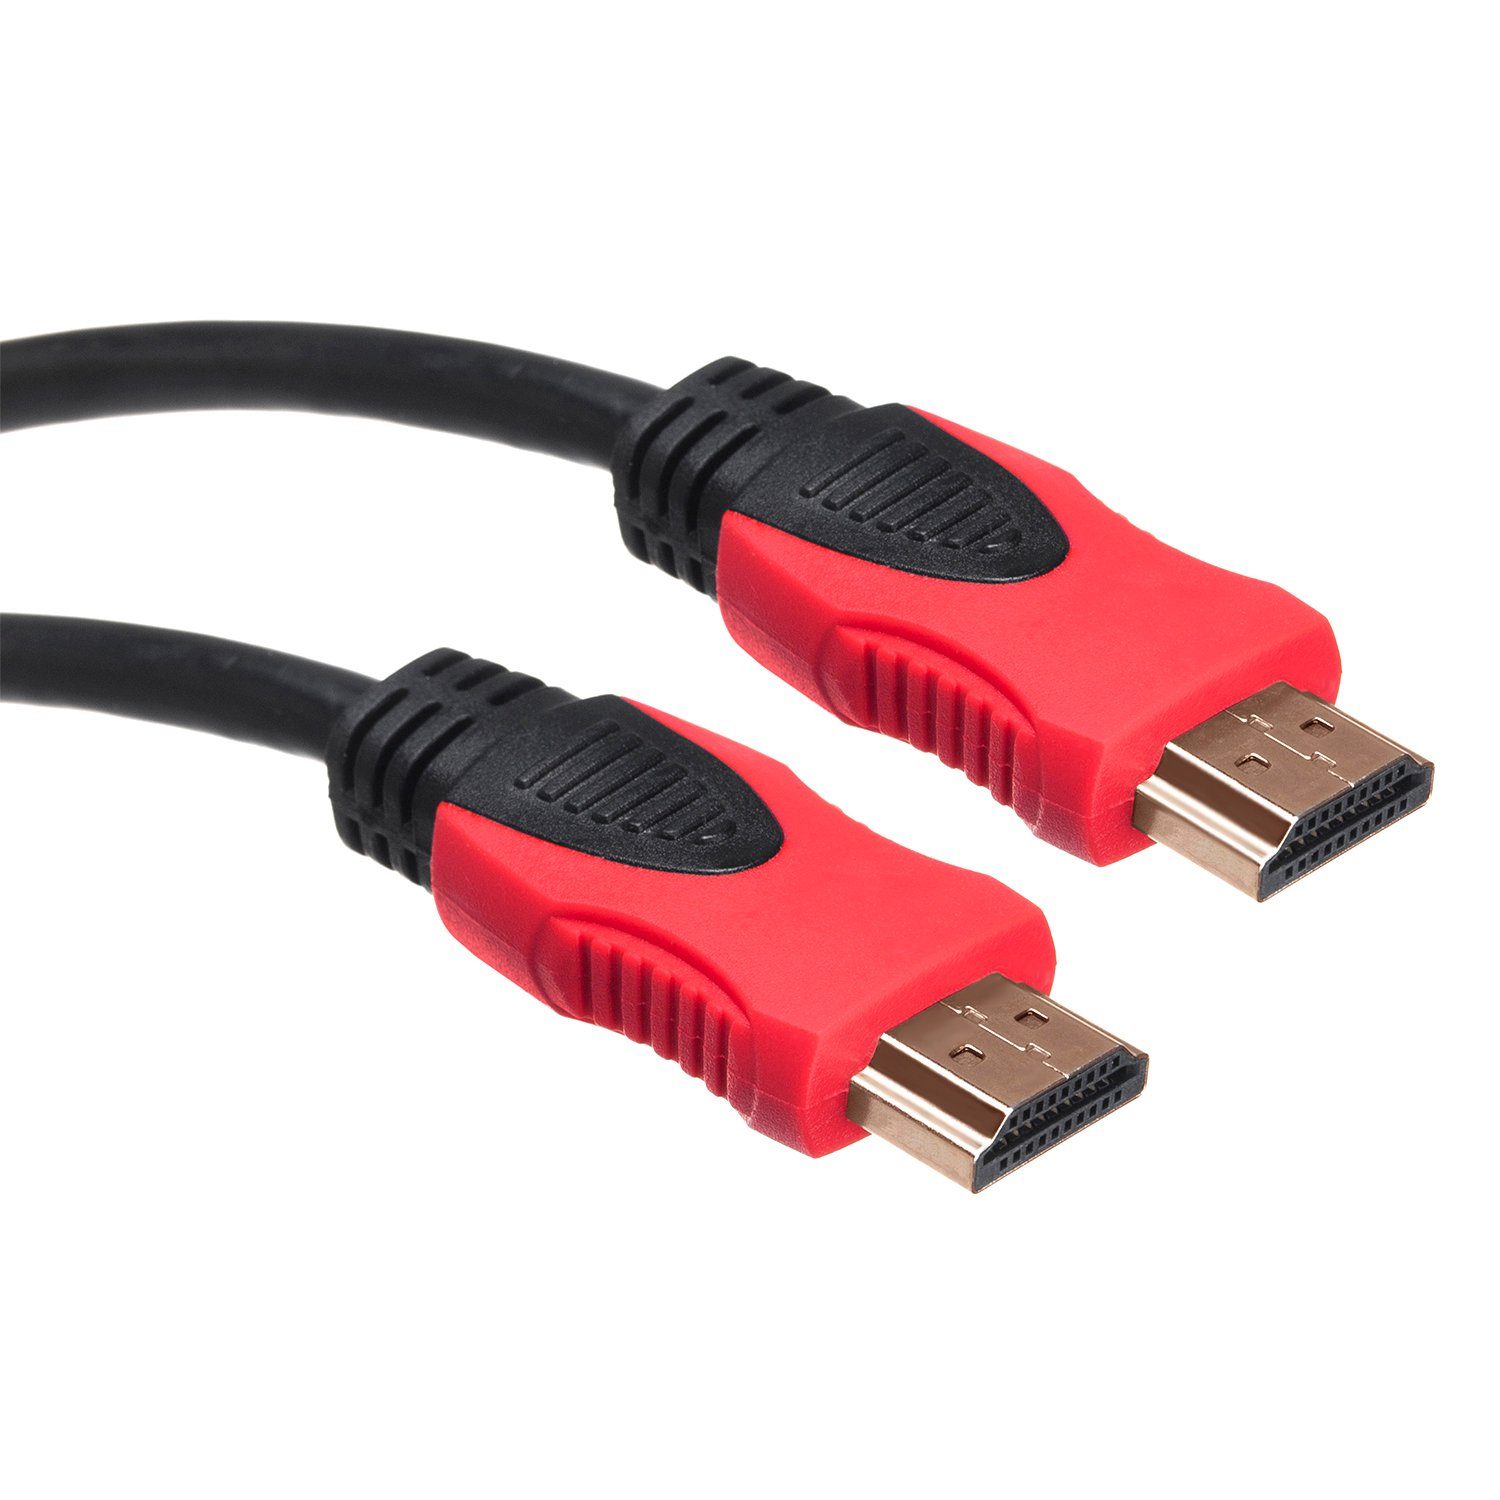 Maclean TV Systems HDMI-Kabel, HDMI Typ A, (180 cm), v1.4 HDMI-Standard,  Ethernet, 3D Deep-Color, Full-HD 4K online kaufen | OTTO